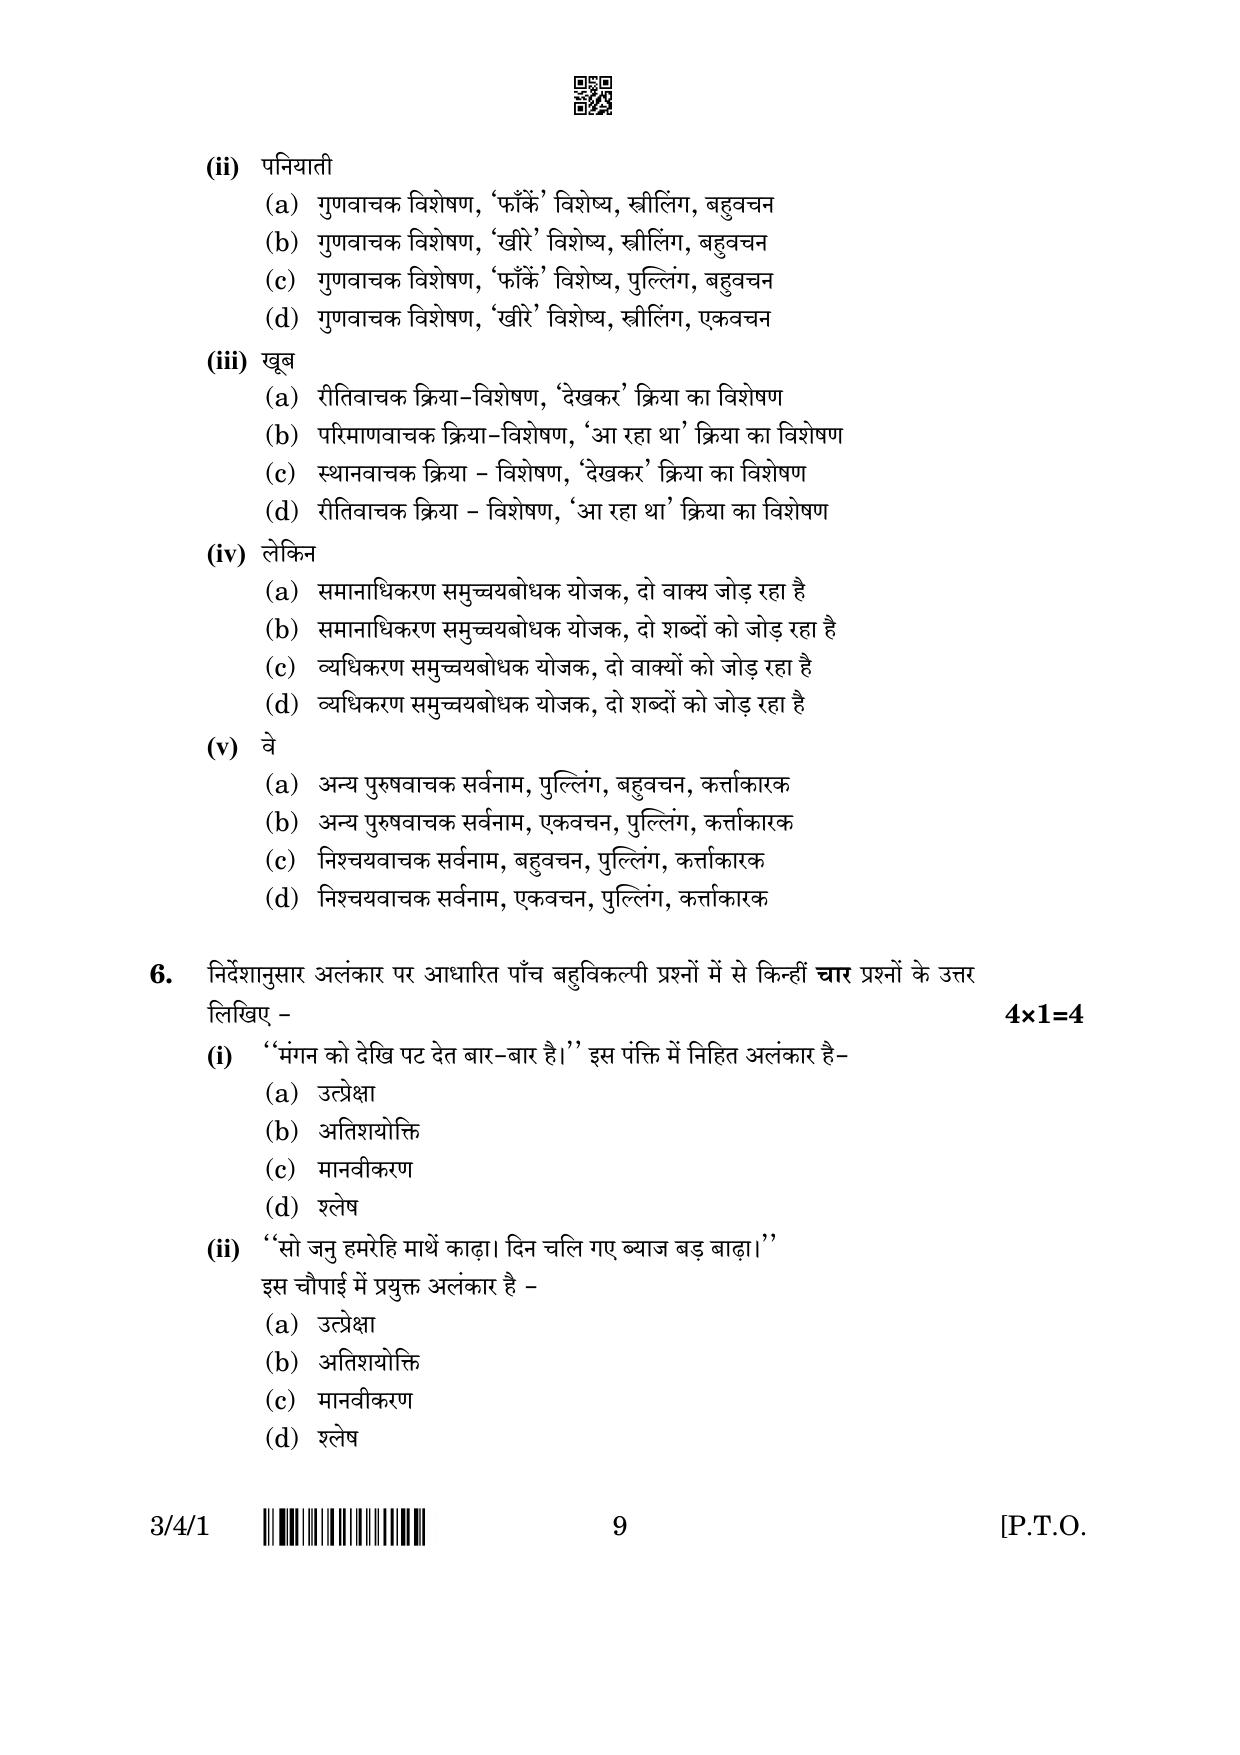 CBSE Class 10 3-4-1 Hindi A 2023 Question Paper - Page 9